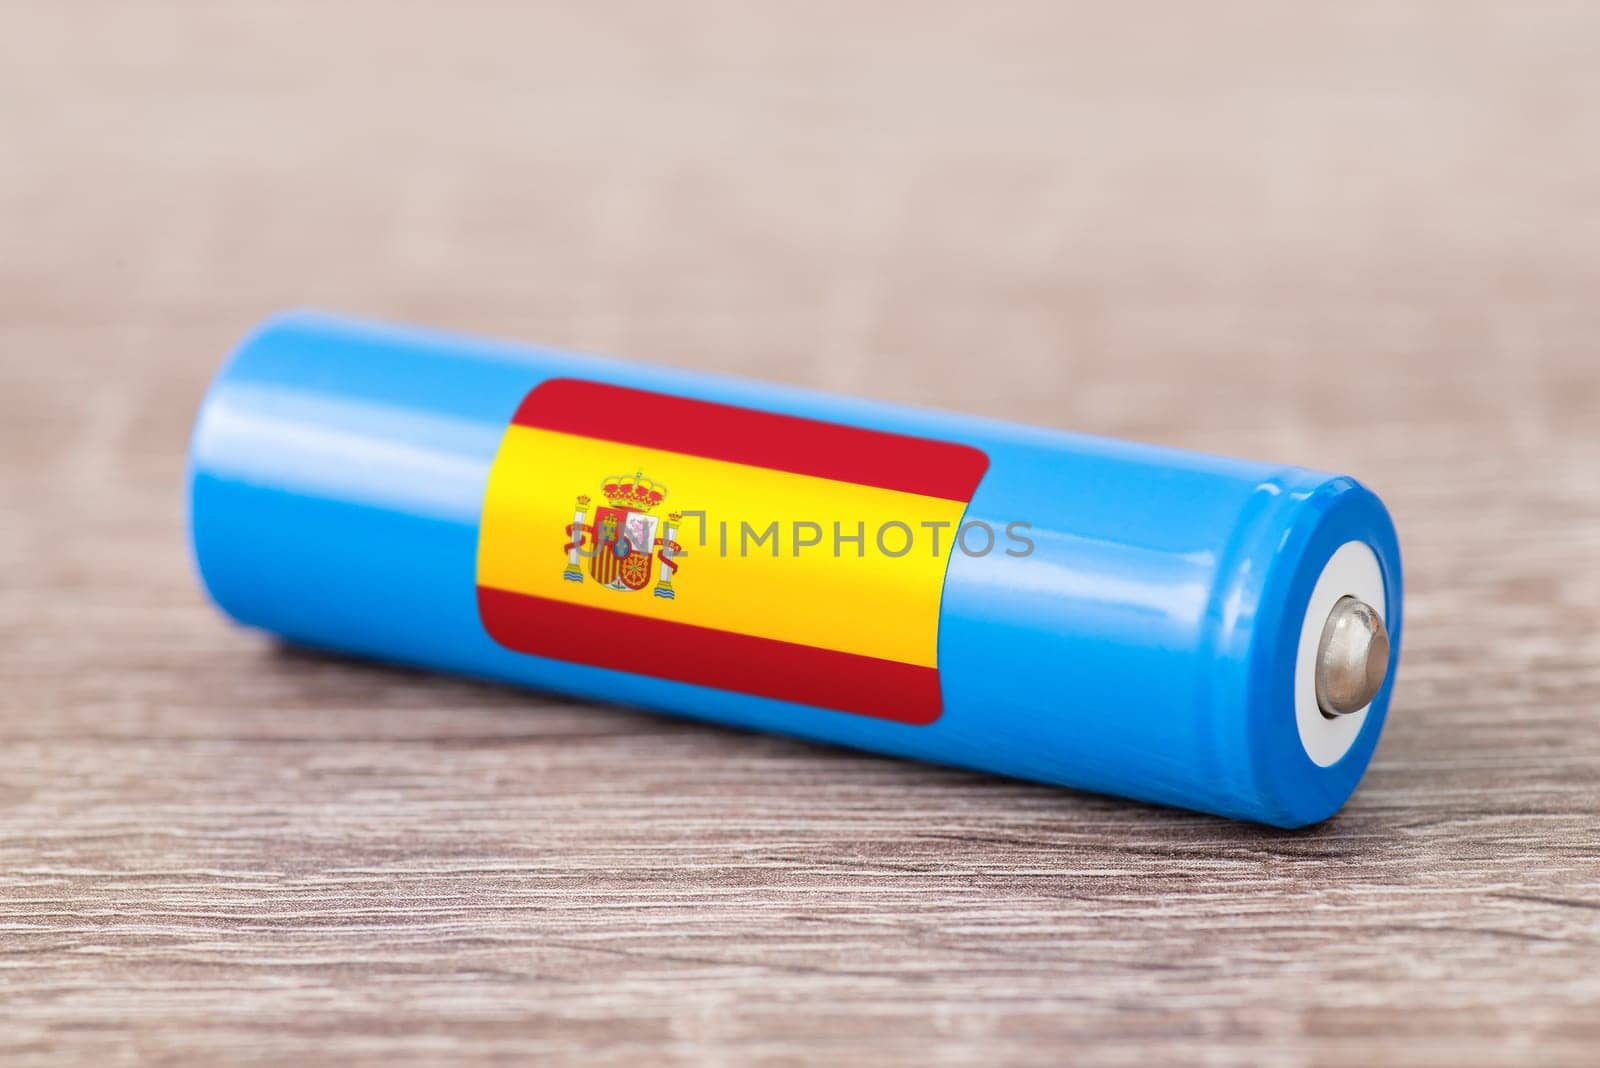 Rechargeable li-ion battery with flag of Spain by VitaliiPetrushenko